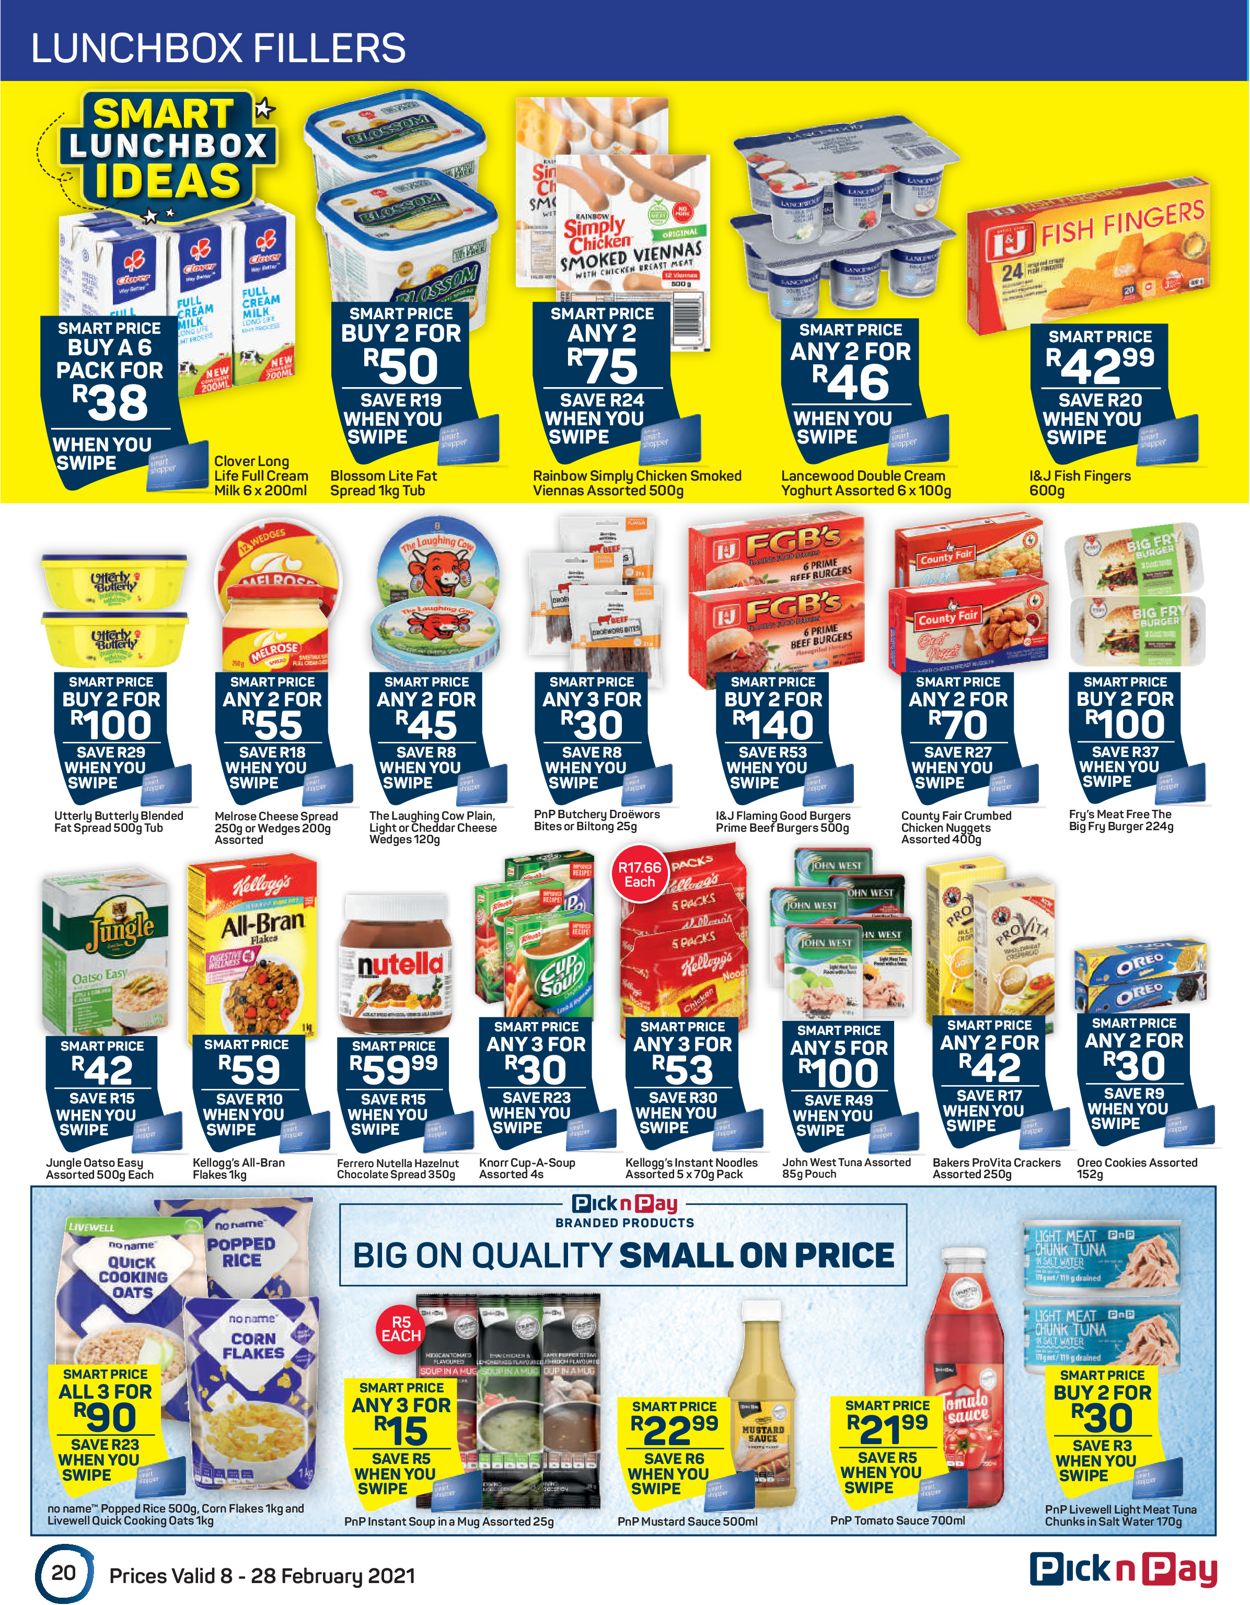 Pick n Pay Back to School 2021 Catalogue - 2021/02/08-2021/02/28 (Page 20)